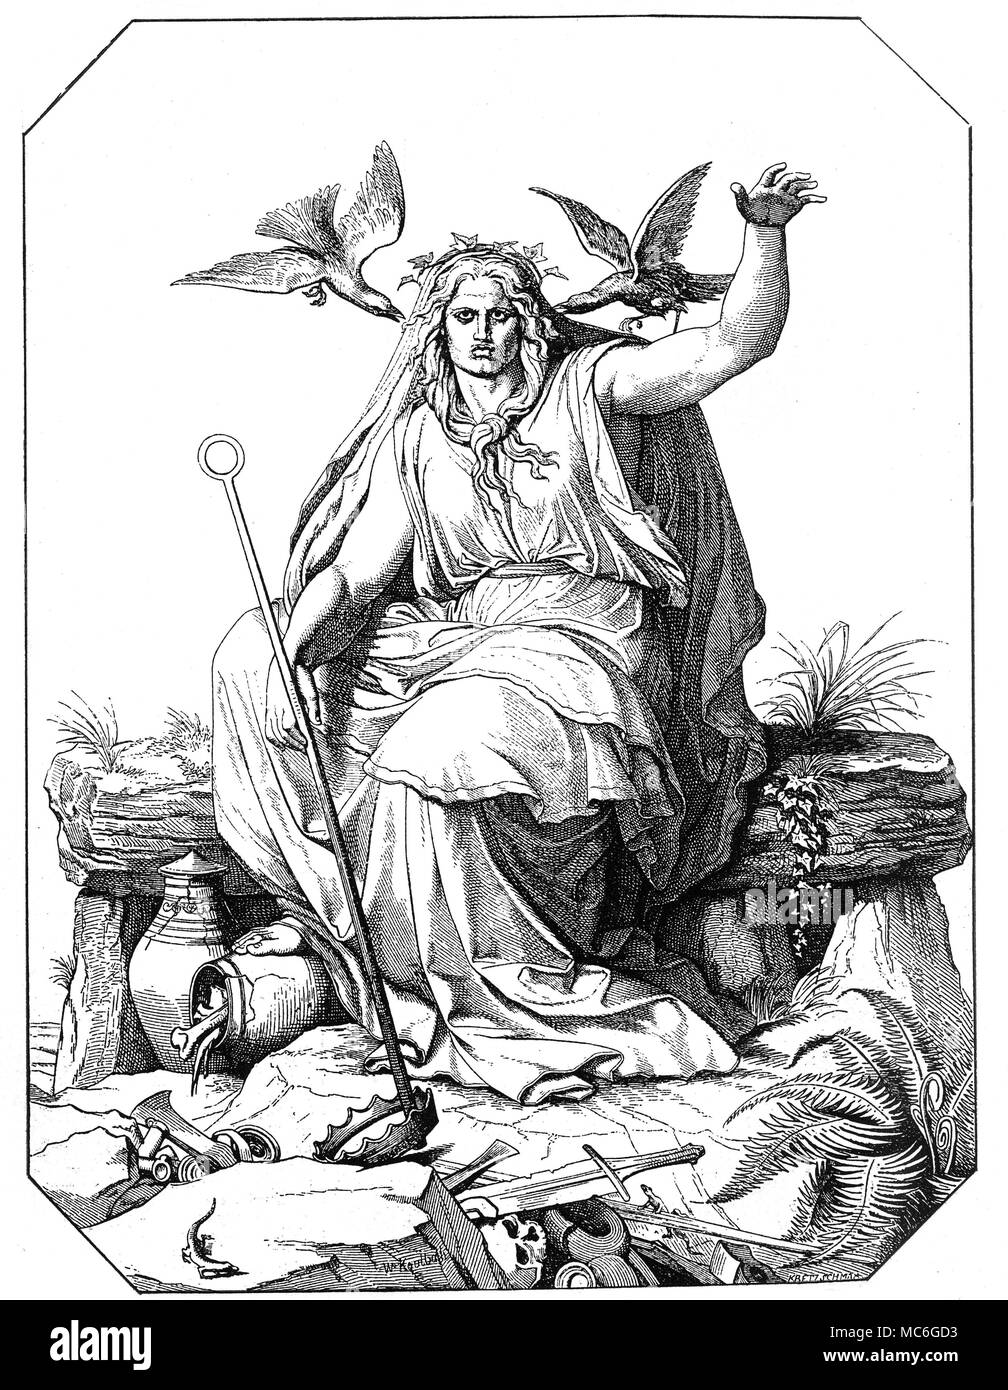 TEUTONIC MYTHOLOGY - ODIN The Nordic God Odin, with his ravens, seated on a 'Druidic' altar stone, or cromlech. Nineteenth century wood engraving by Kretzchman of the painting by William von Kaulbach. Stock Photo